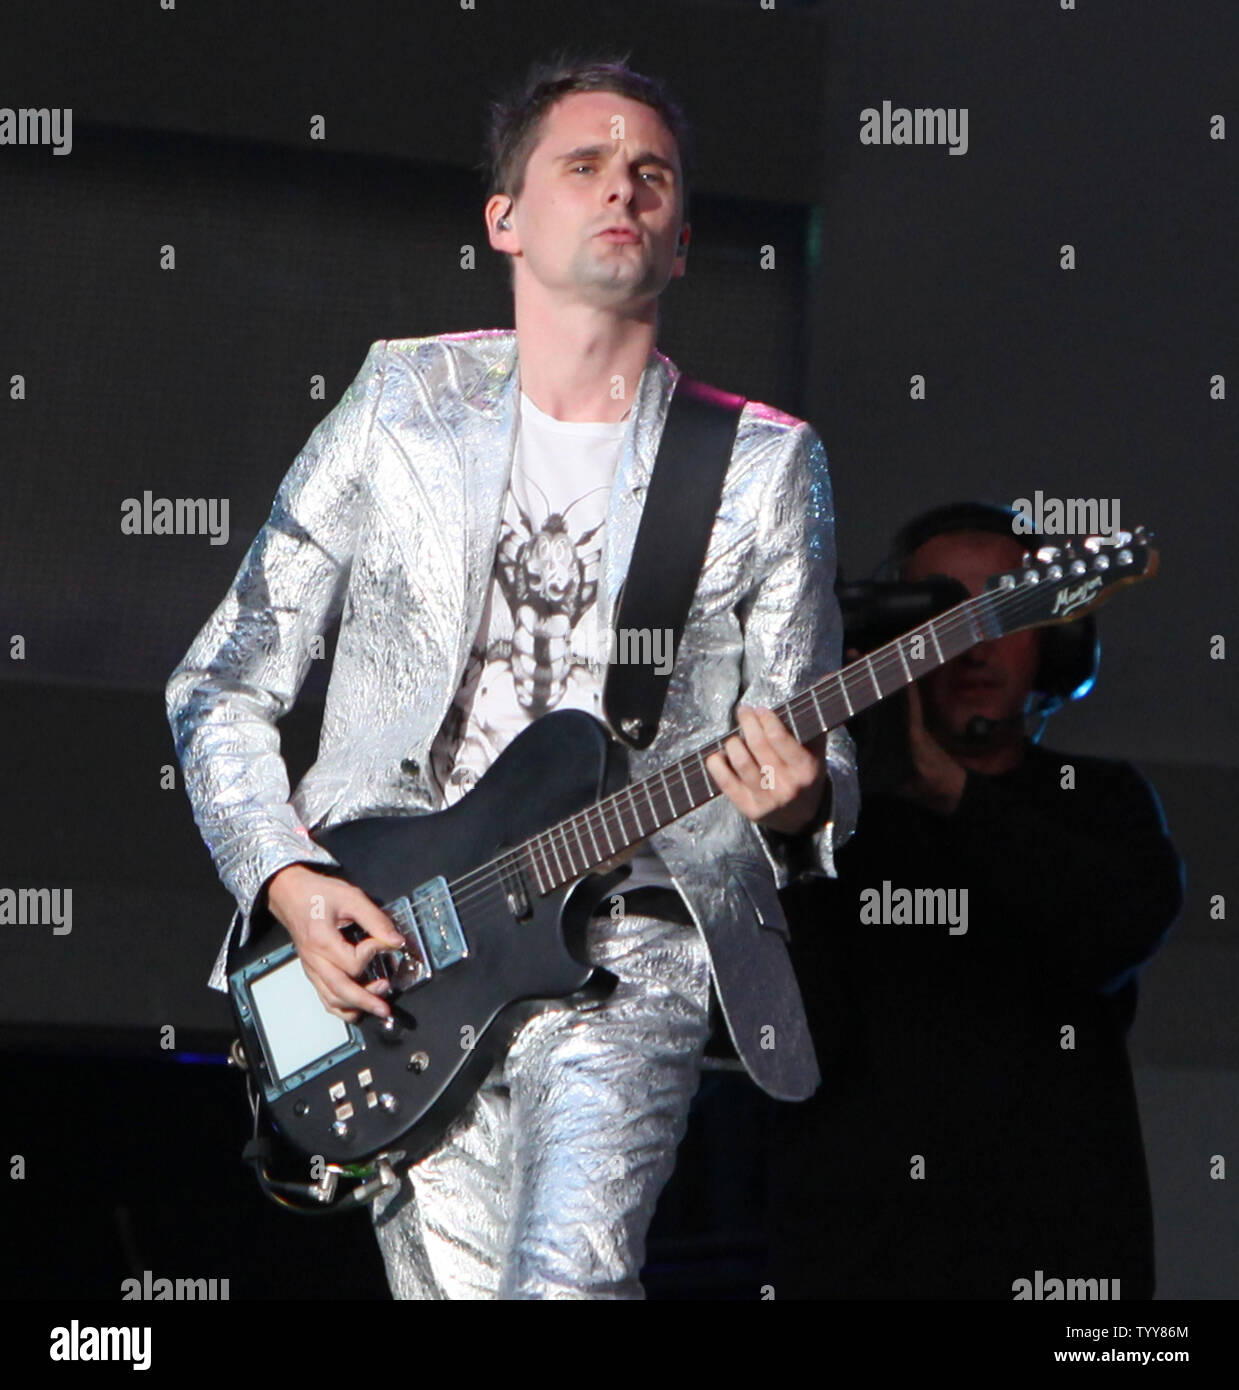 Lead singer and guitarist Matthew Bellamy performs with his group Muse at the Stade de France near Paris on June 11, 2010.   UPI/David Silpa Stock Photo